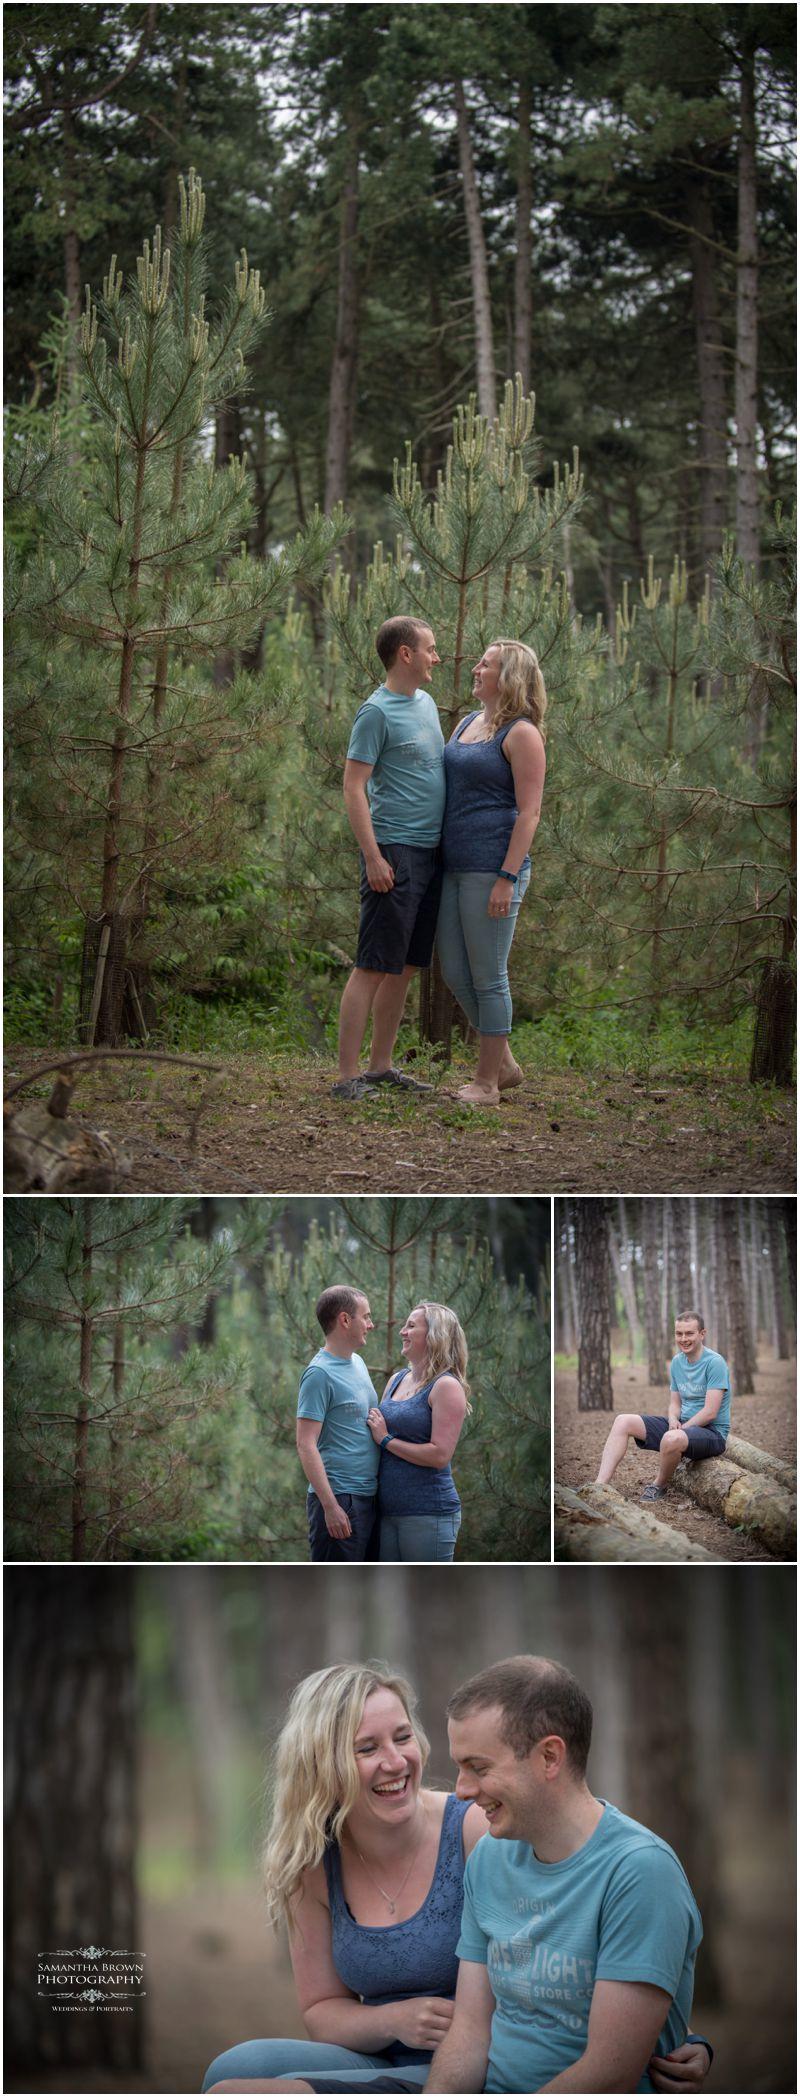 Claire and Andy's pre wedding shoot